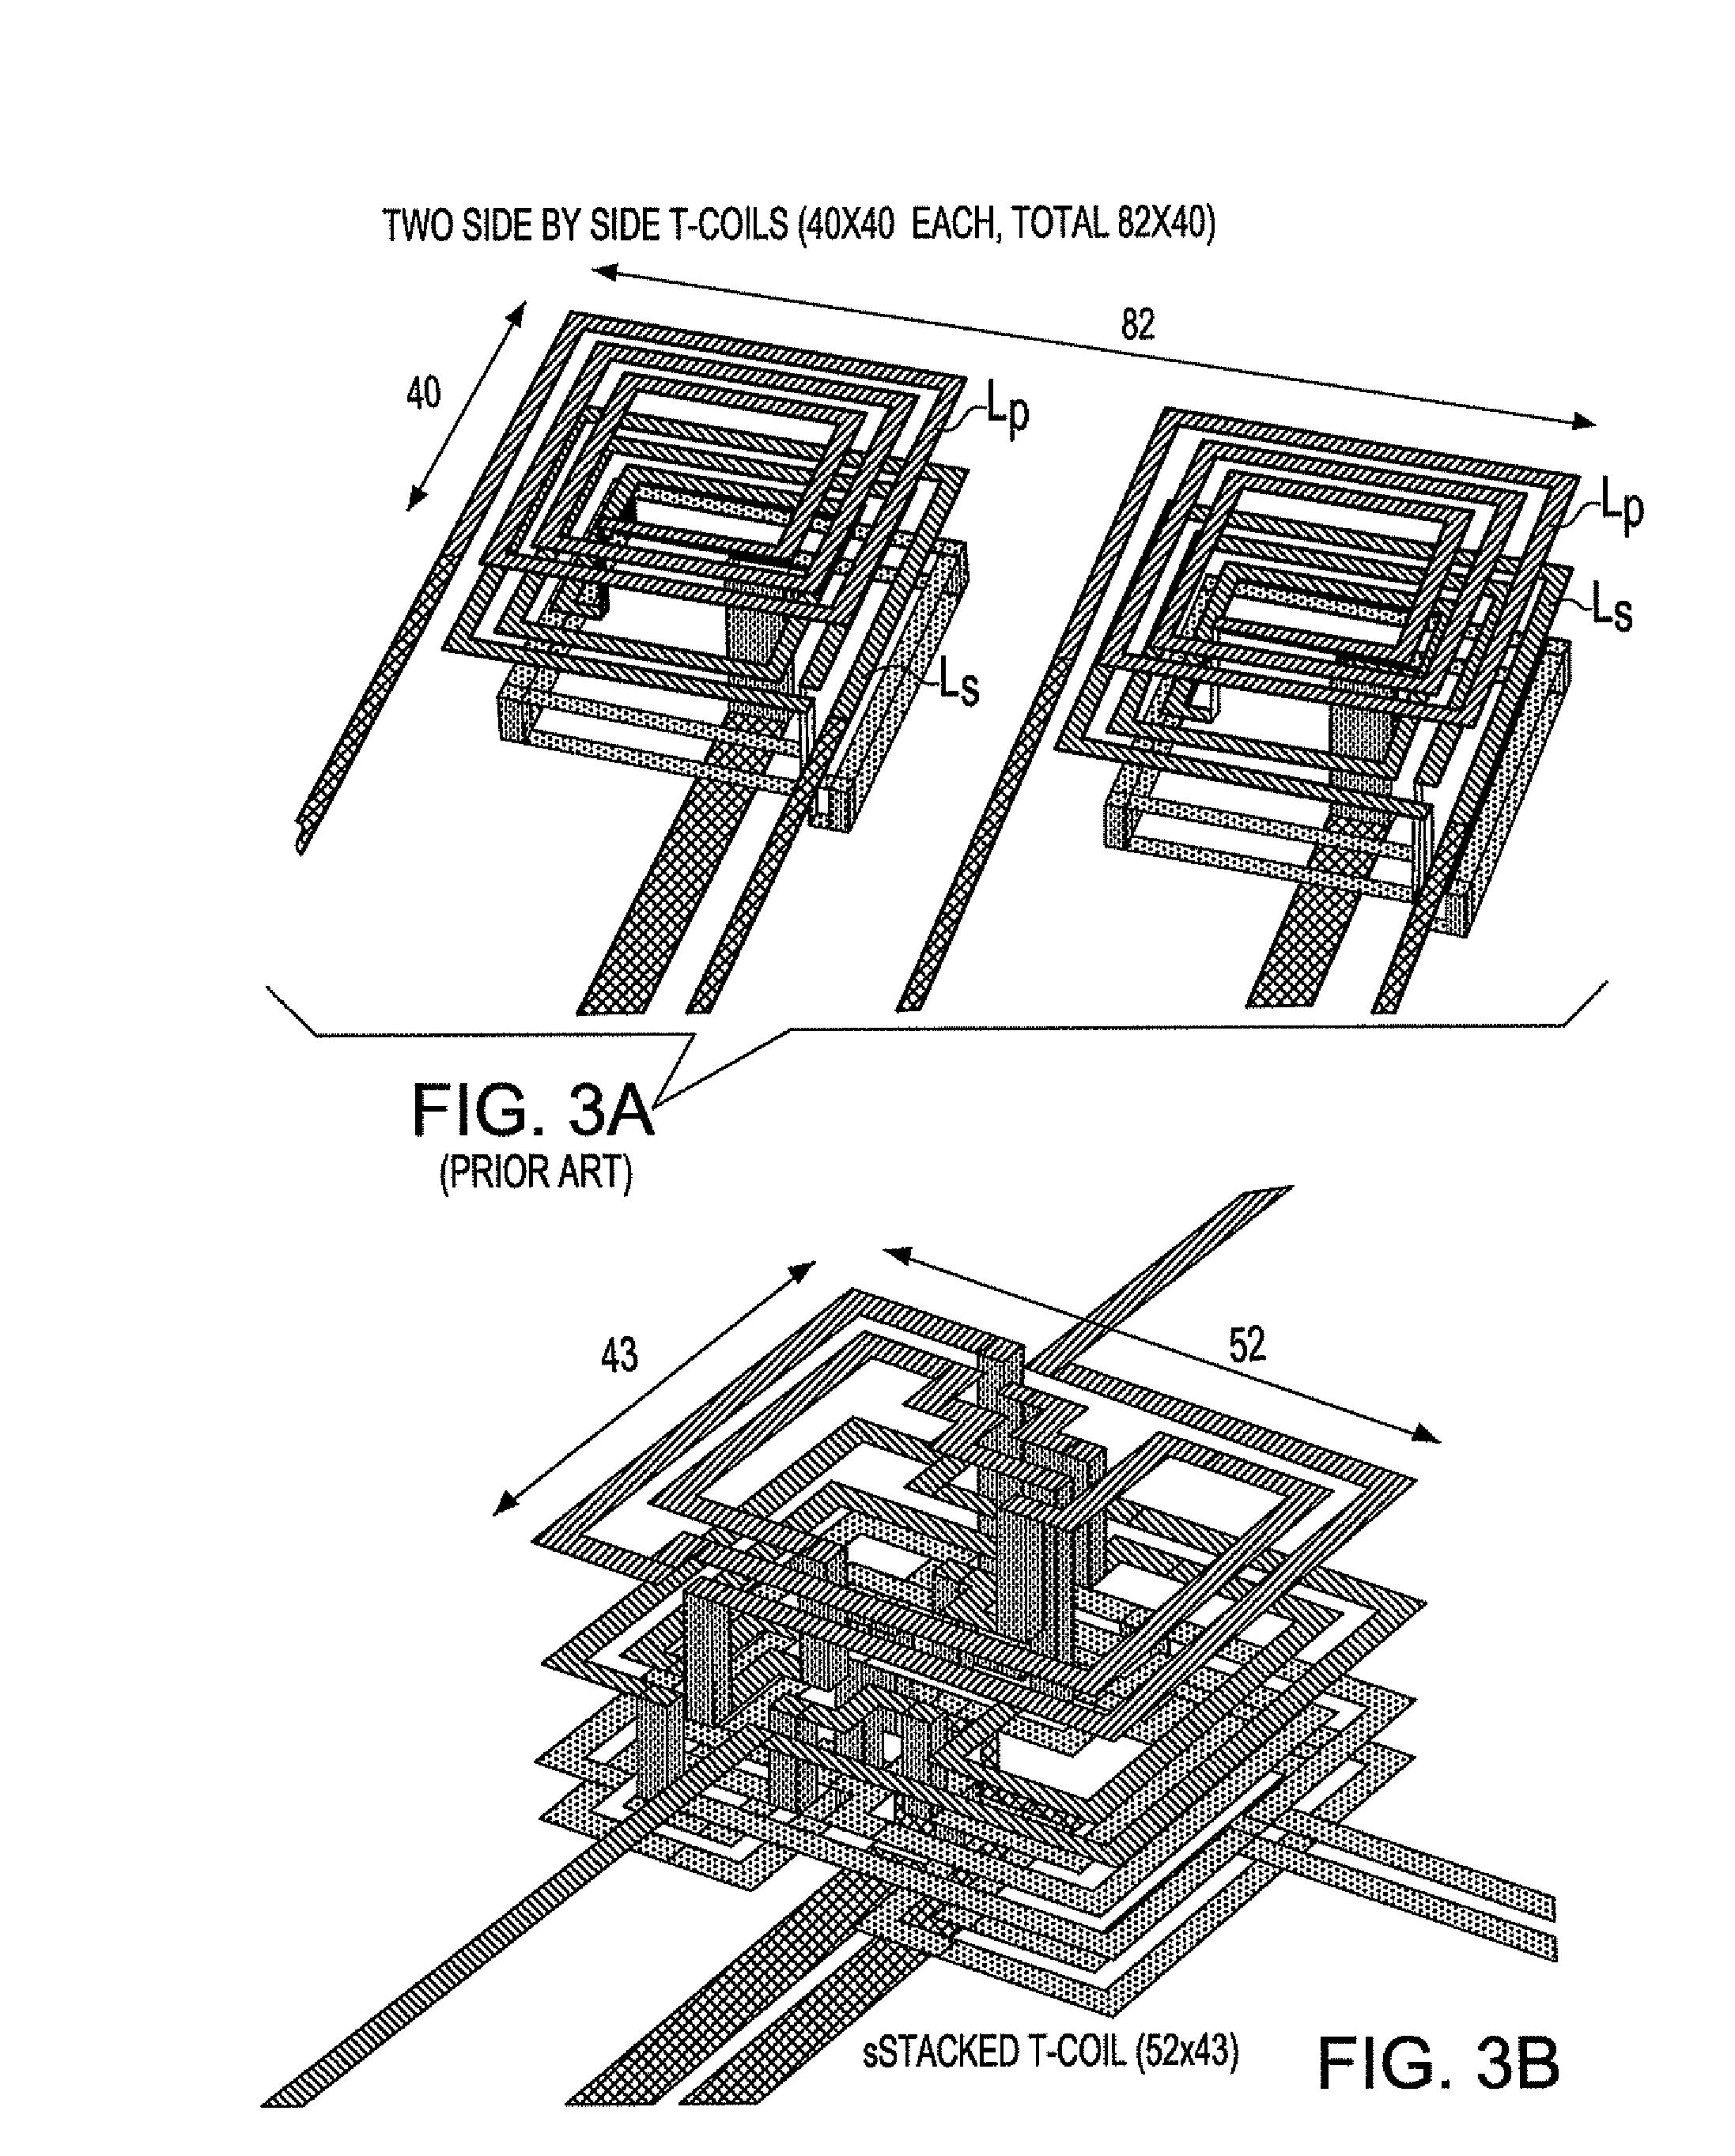 Area efficient, differential T-coil impedance-matching circuit for high speed communications applications